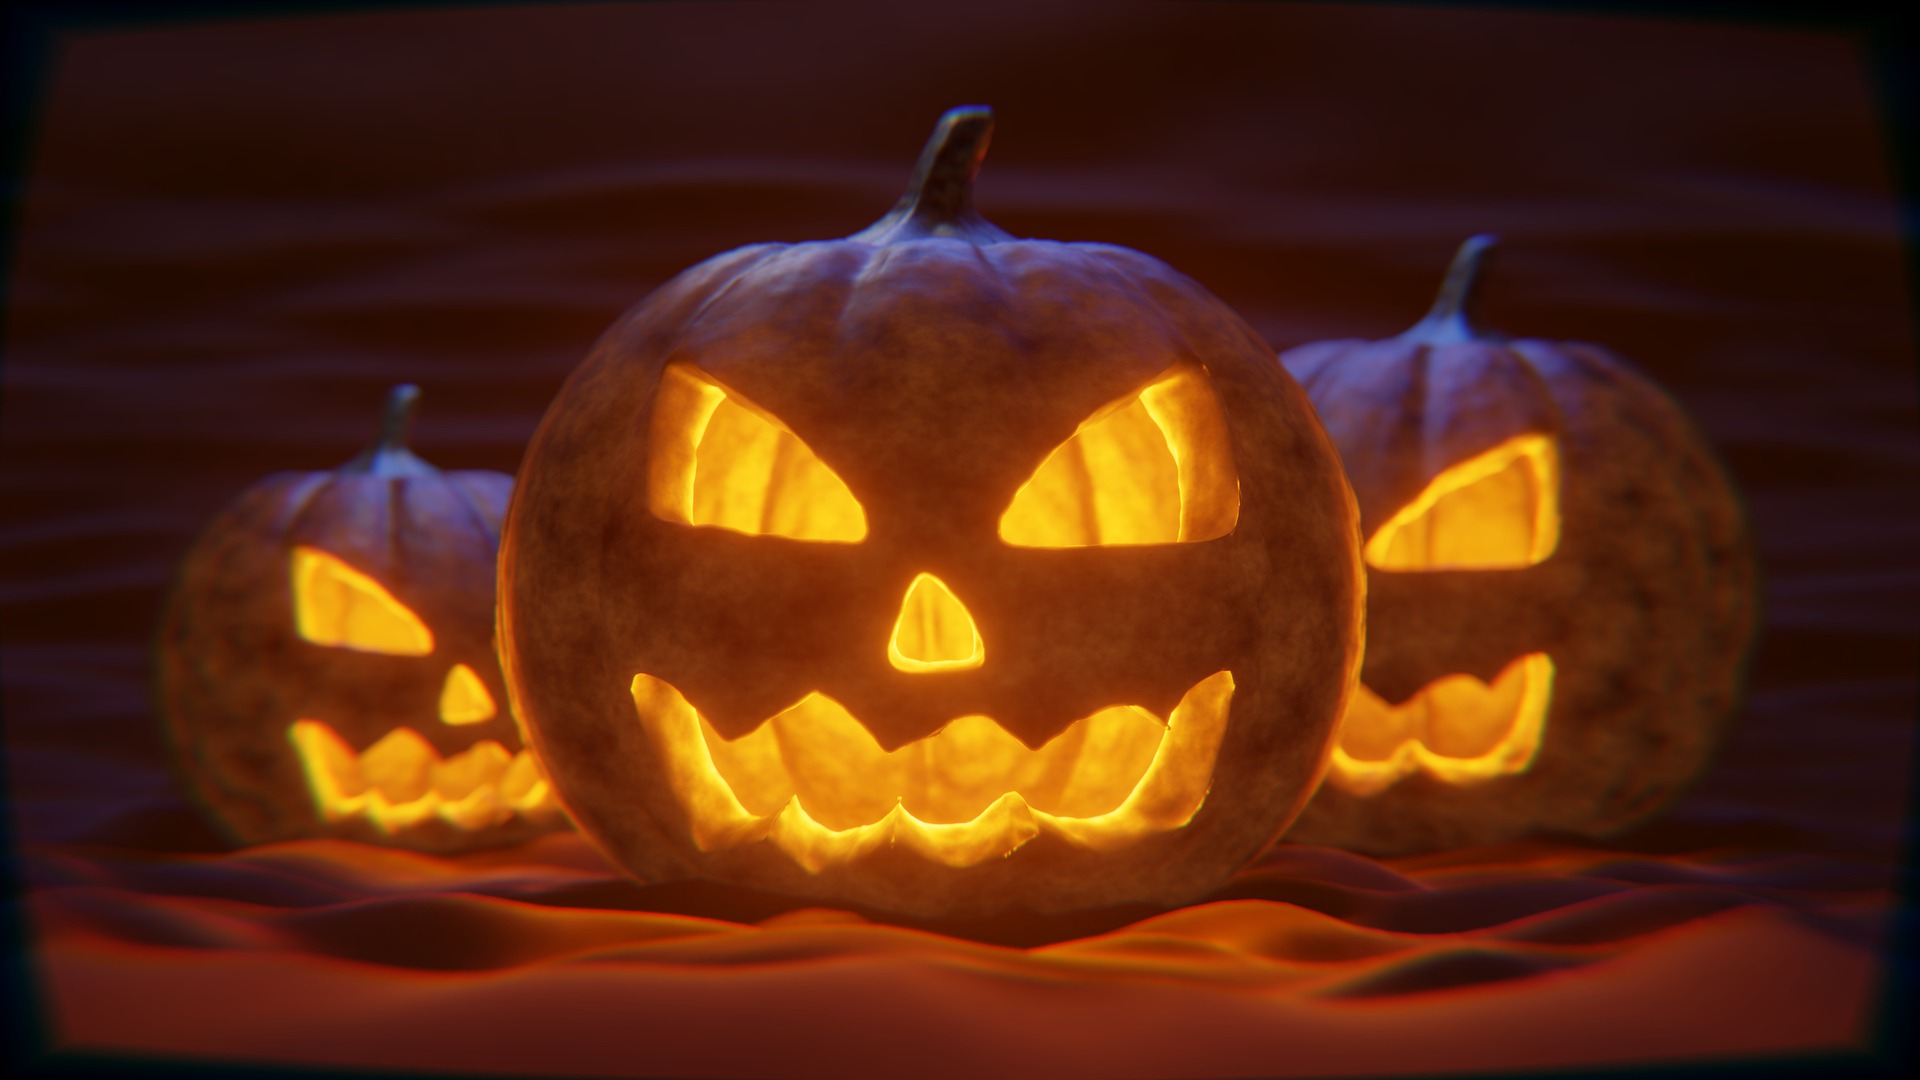 Enjoy pumpkins and more this Halloween in Dripping Springs